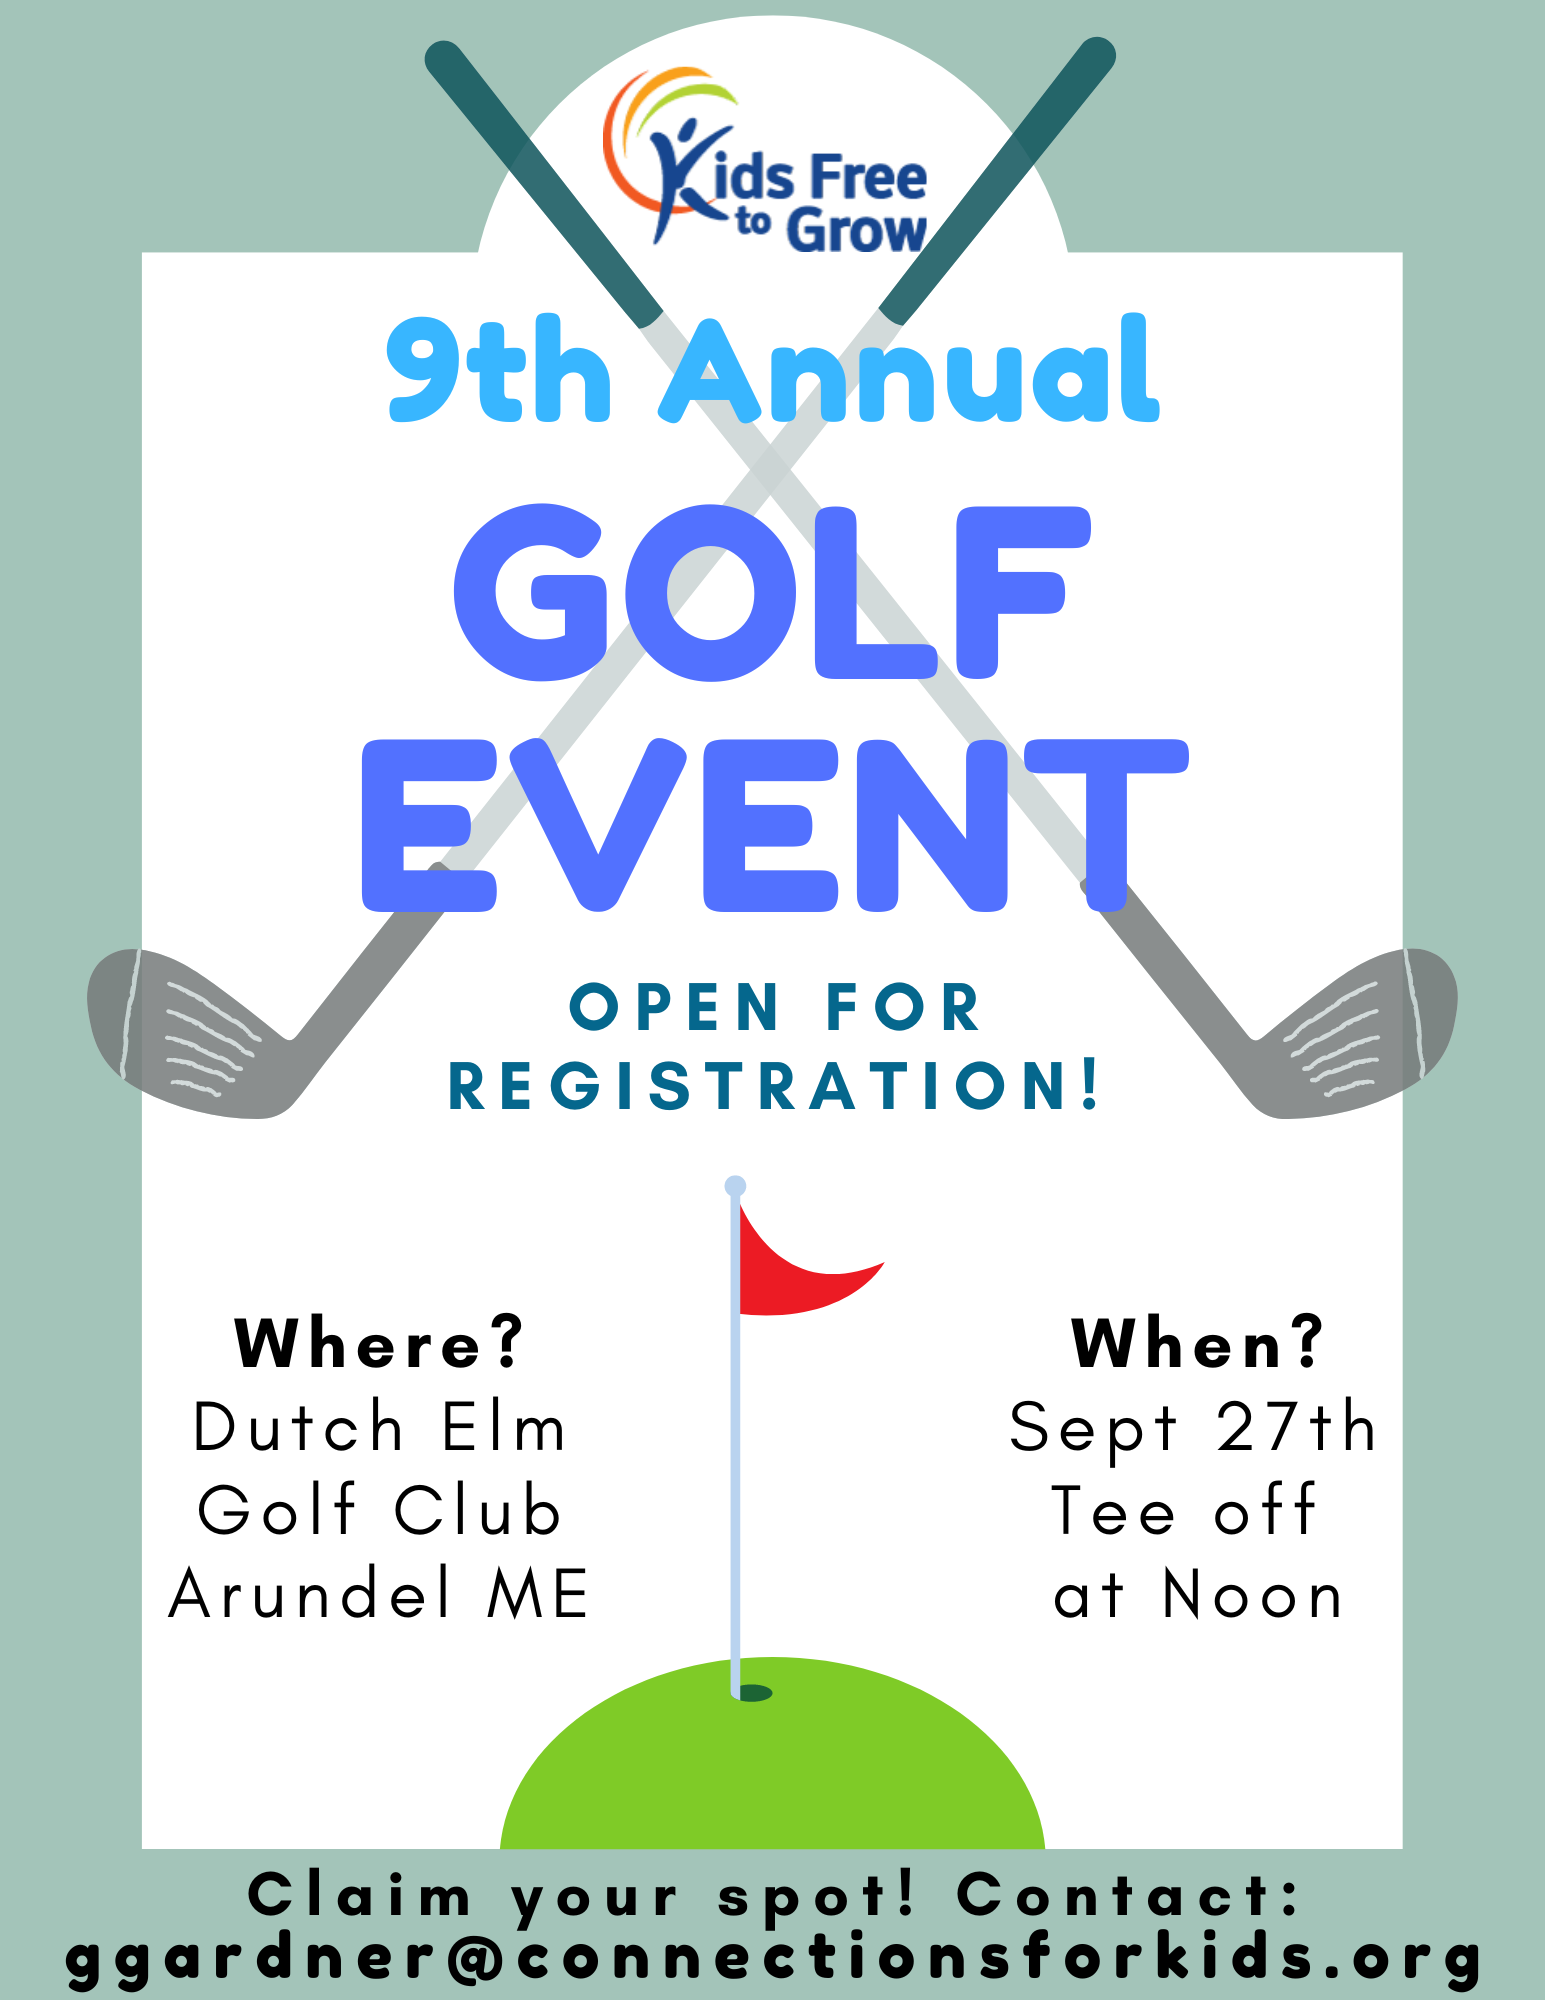 Annual Golf Fundraising Event for Kids Free to Grow! Working towards fighting child abuse and providing parents & children with educational workshops and programs.